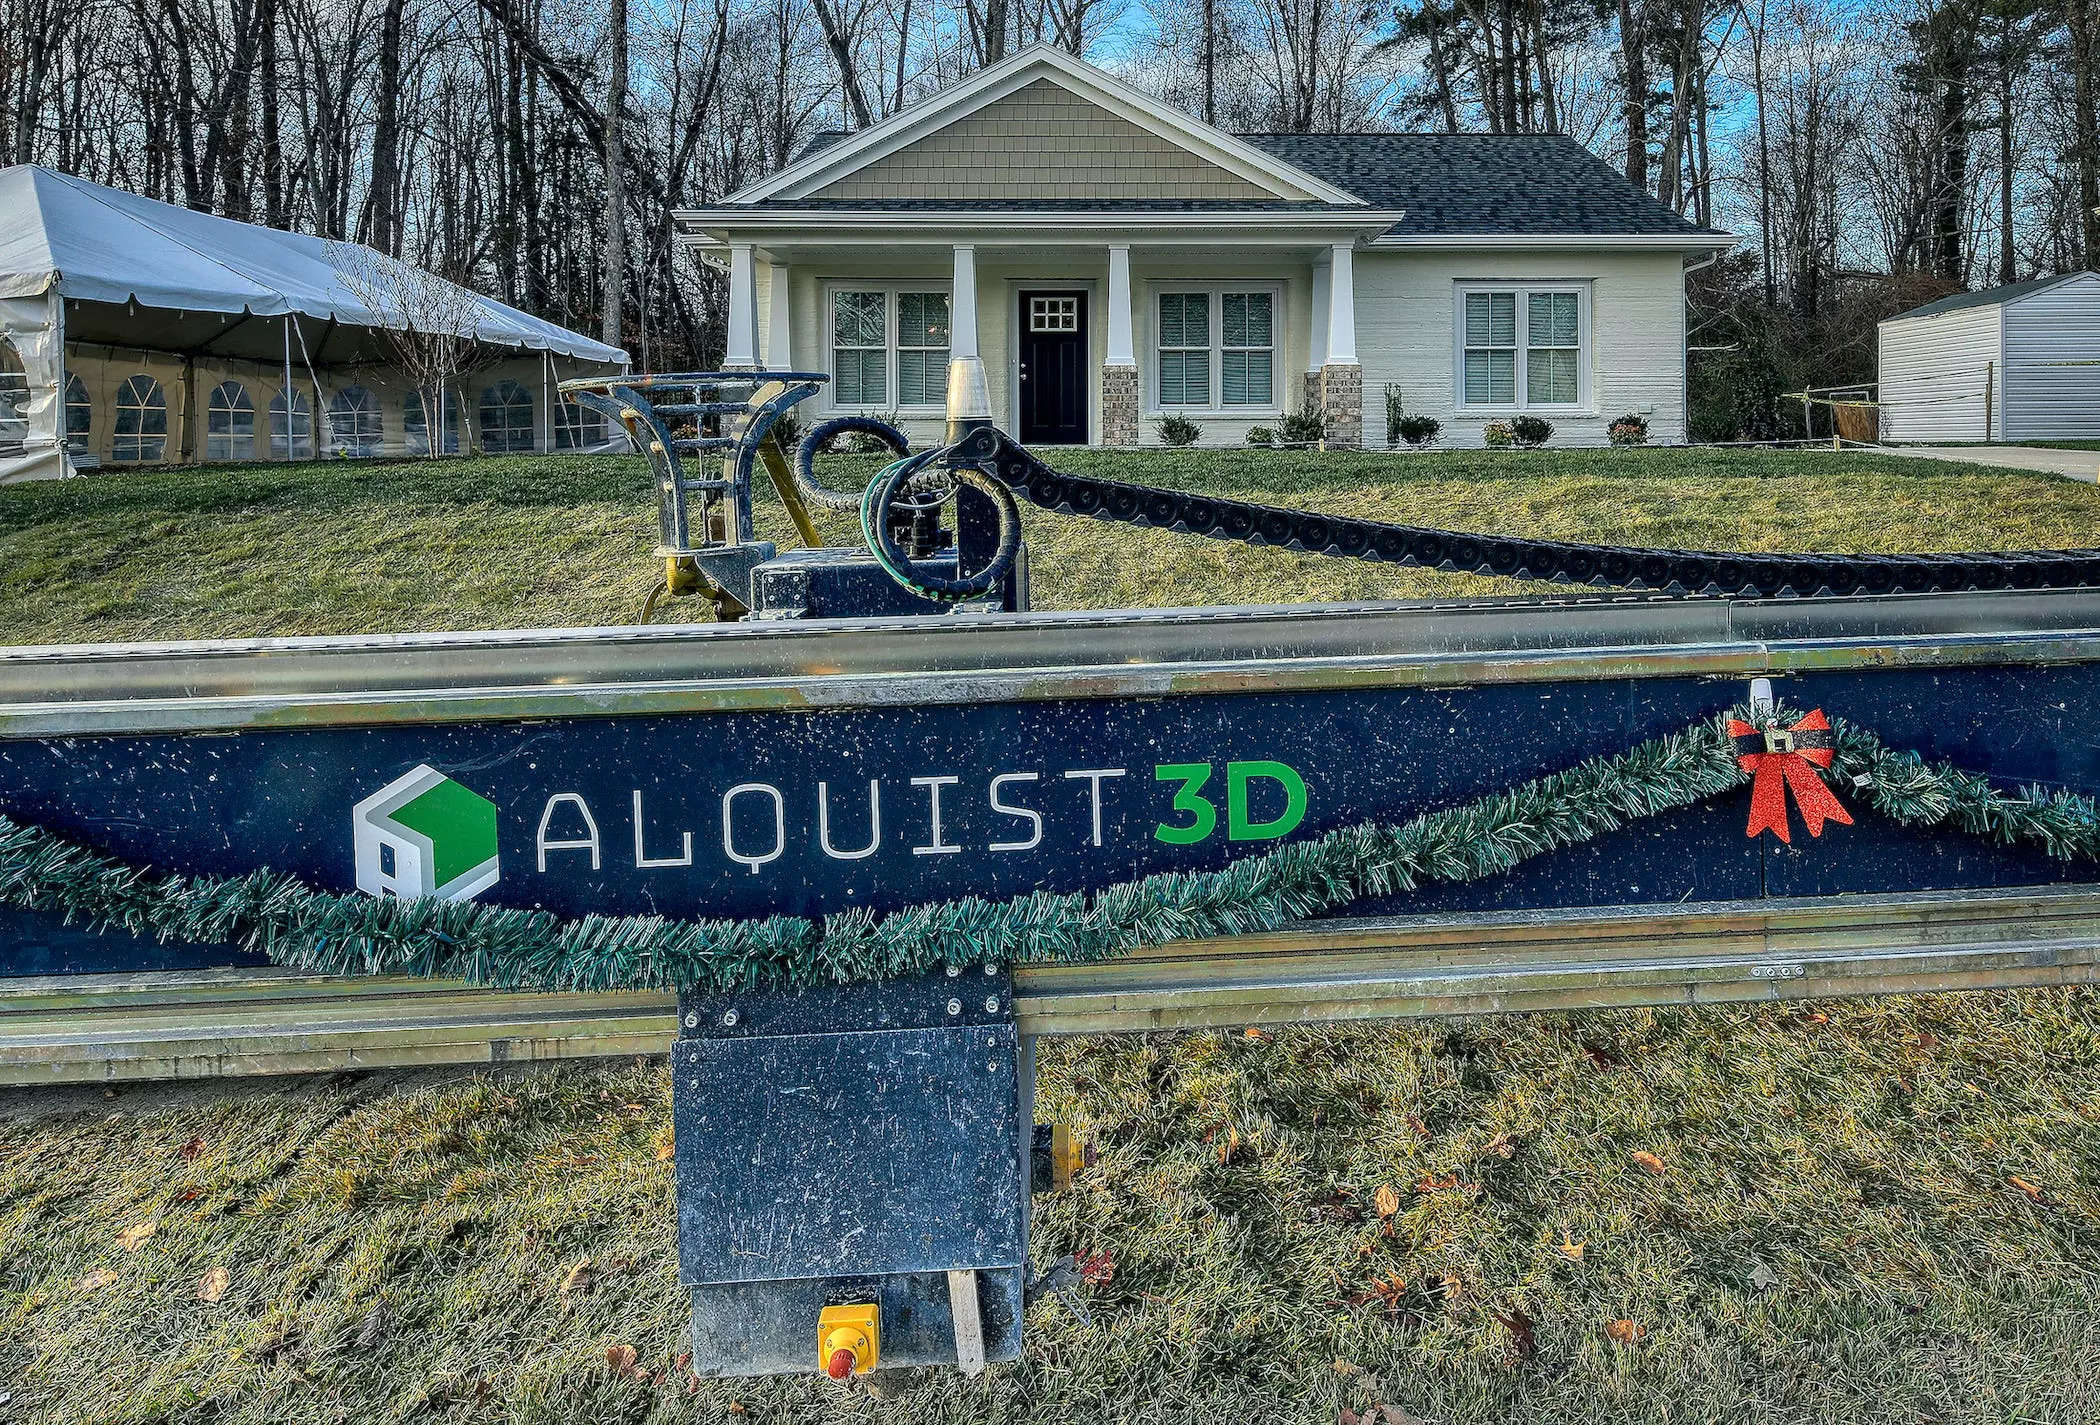 The exterior of the Habitat for Humanity 3D printed house in Virginia behind a patch of green grass, an Alquist 3D barricade, walkway